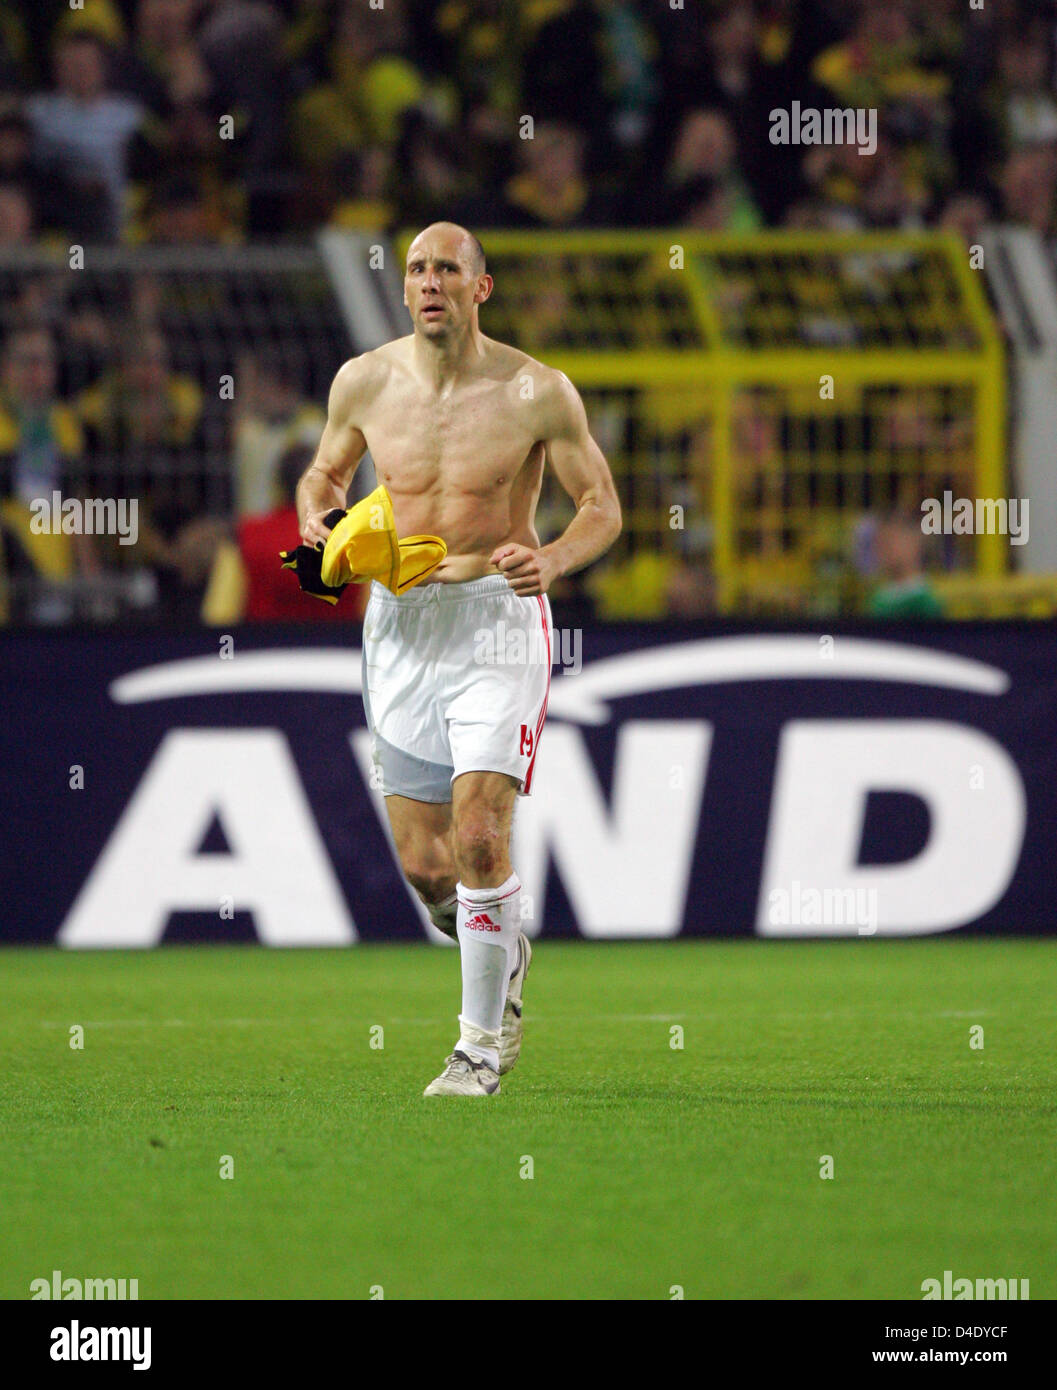 Nuremberg striker Jan Koller cheers to both sides' fans after the German Bundesliga match Borussia Dortmund v 1.FC Nuremberg at Signal Iduna Park stadium of Dortmund, Germany, 02 May 2008. Koller had been playing and title-winning for five years with Dortmund and thus highly liked by side's fans. The match ended in a goalless draw. Photo: Bernd Thissen Stock Photo